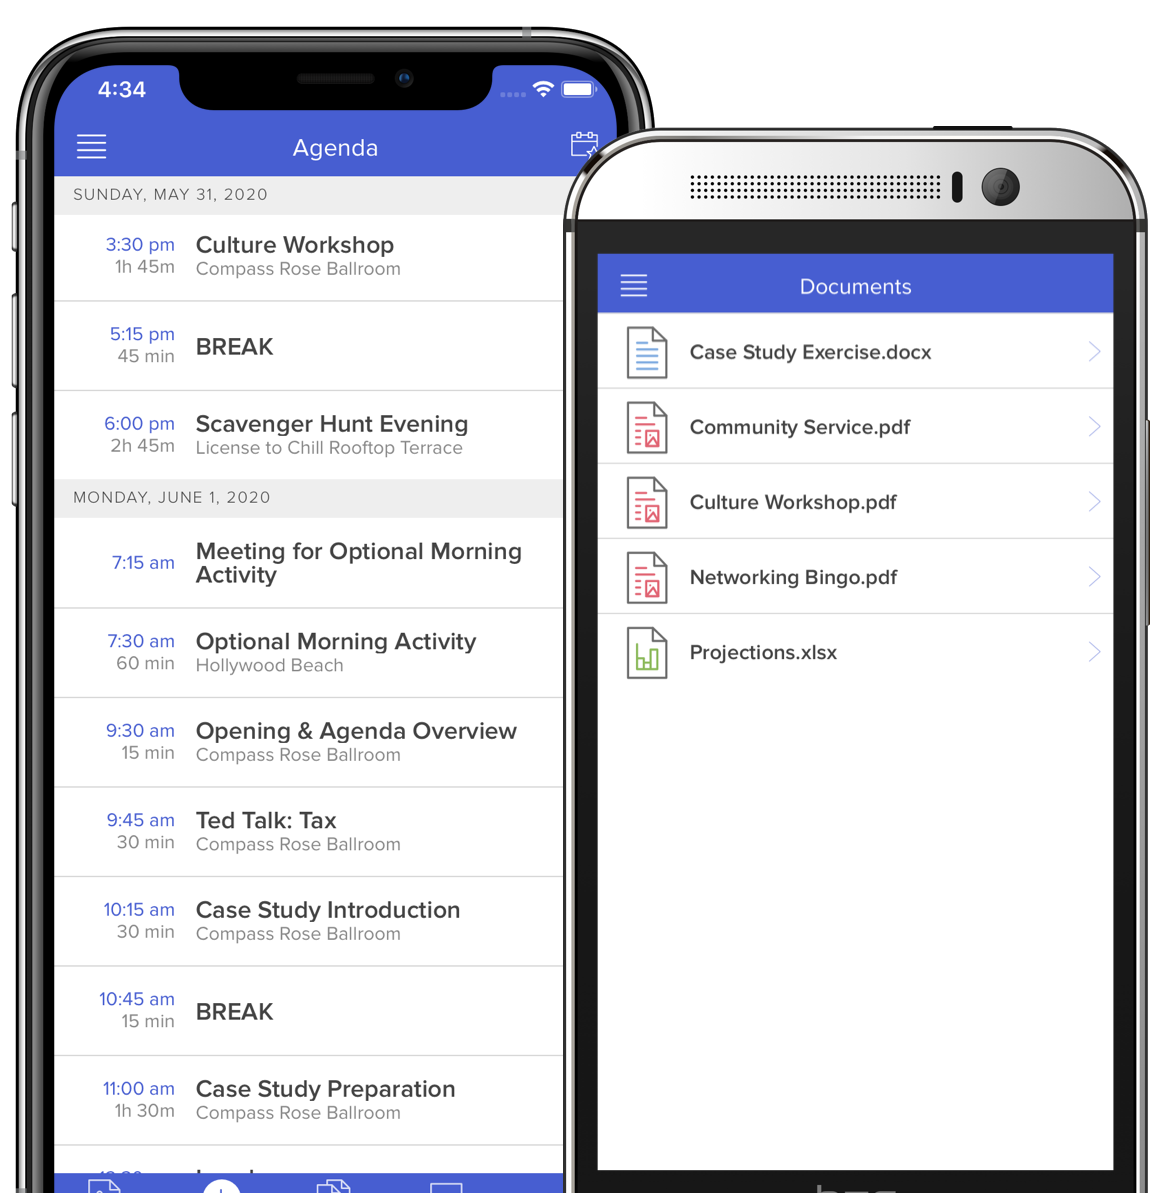 Share the schedule, agenda and documents in the mobile app with the attendees of your conference, event or training